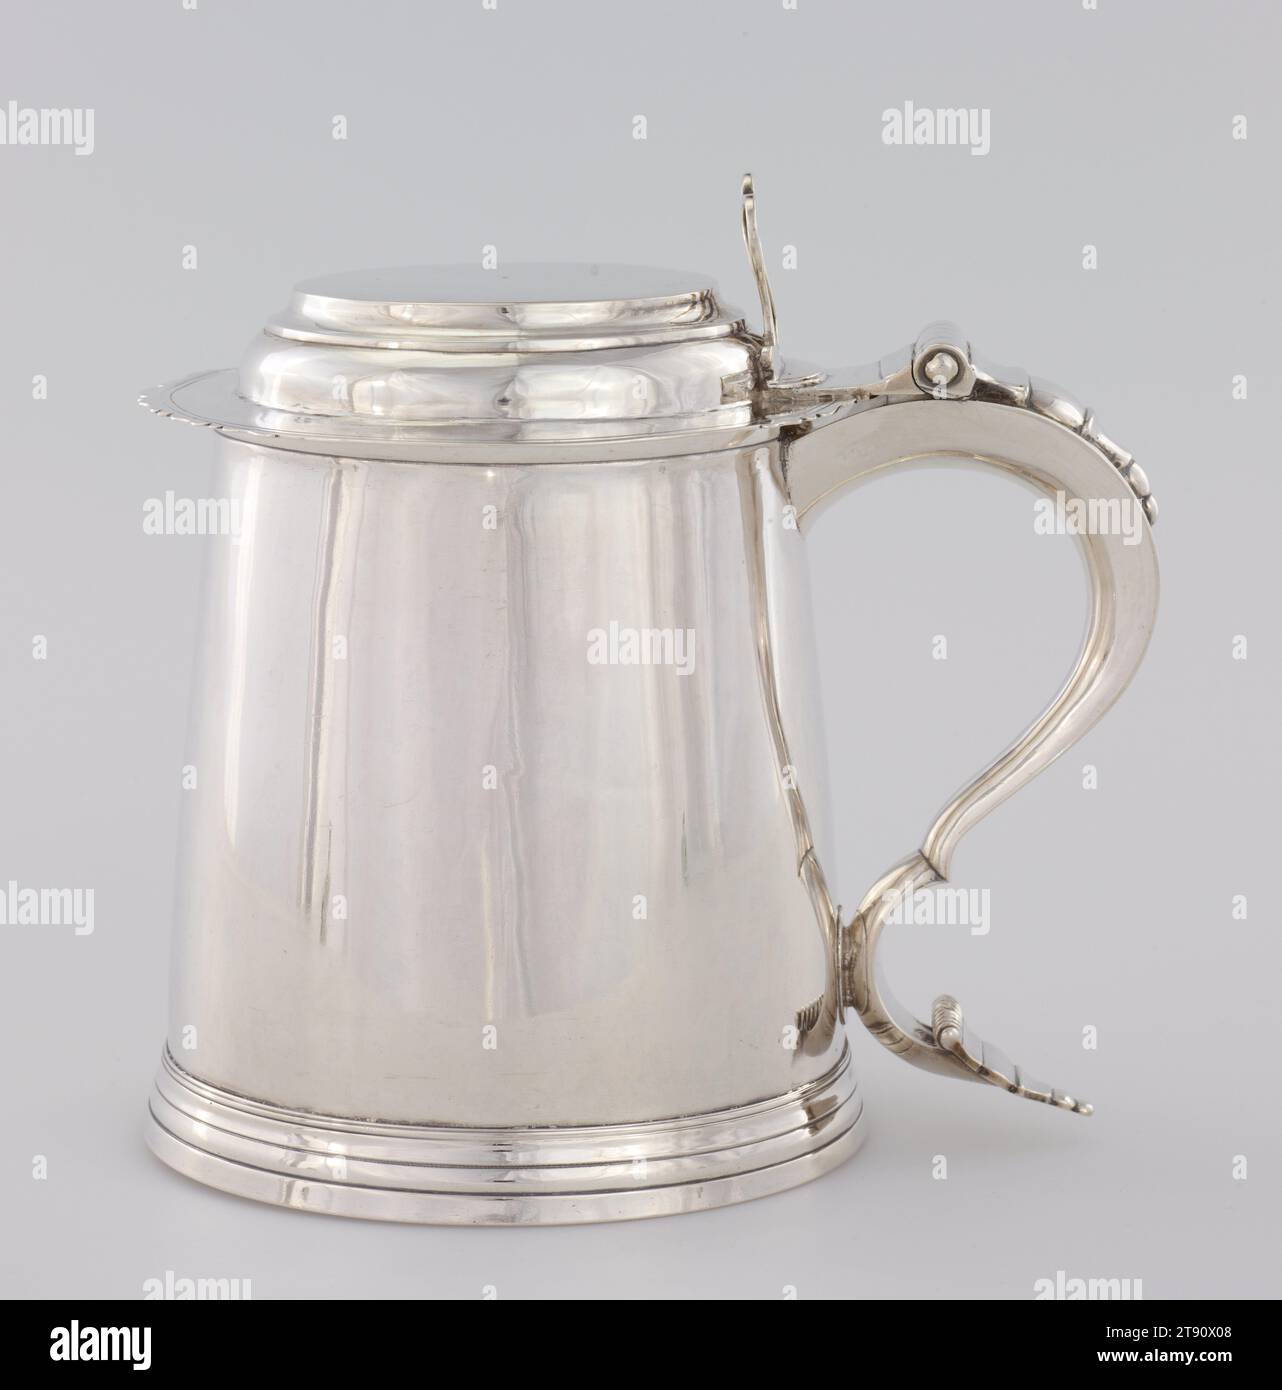 Tankard, about 1760-1770, Unknown New York, American, 1767 - 1792, 8 x 7 3/4 x 5 1/2 in. (20.32 x 19.69 x 13.97 cm), Silver, United States, On the underside of the base of this tankard is an inscription that reads, 'THE GIFT OF Mr. JOSEPH MARVIN, TO JANE LORD, HIS GRAND DAUGHTER 1790.' The tankard subsequently descended through the Noyes family of Old Lyme, Connecticut, and eventually came to Minnesota with Edwin Noyes Dodge in 1865. Mr. Dodge, a farmer, served as a state senator from Dodge County, Minnesota from 1887 to 1889 Stock Photo